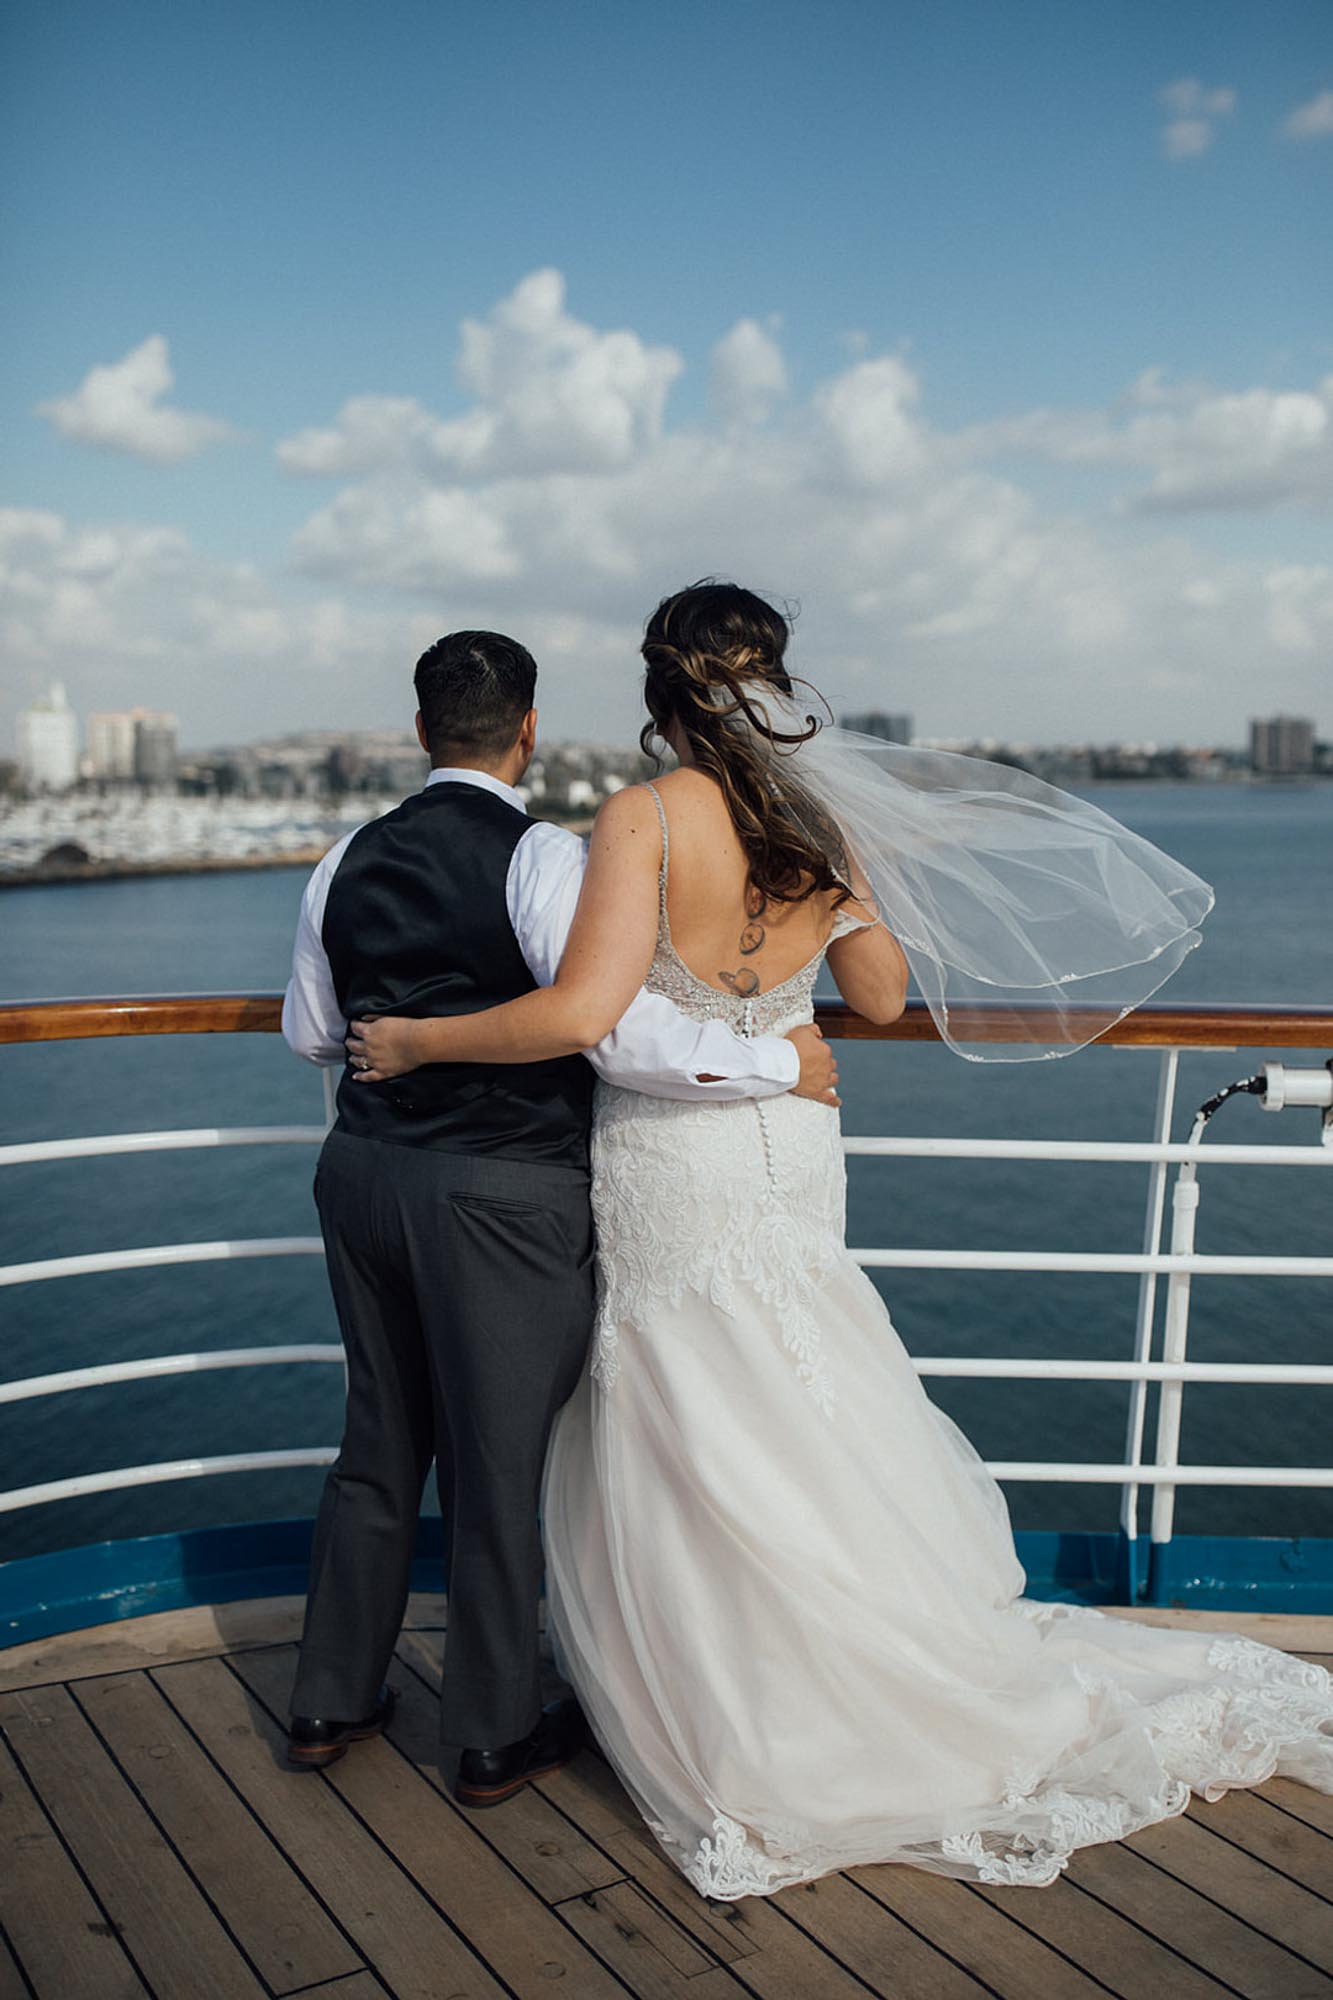 Cruise wedding with attendants in dusty rose gowns and brown suits | Toni G Photo | Featured on Equally Wed, the leading LGBTQ+ wedding magazine